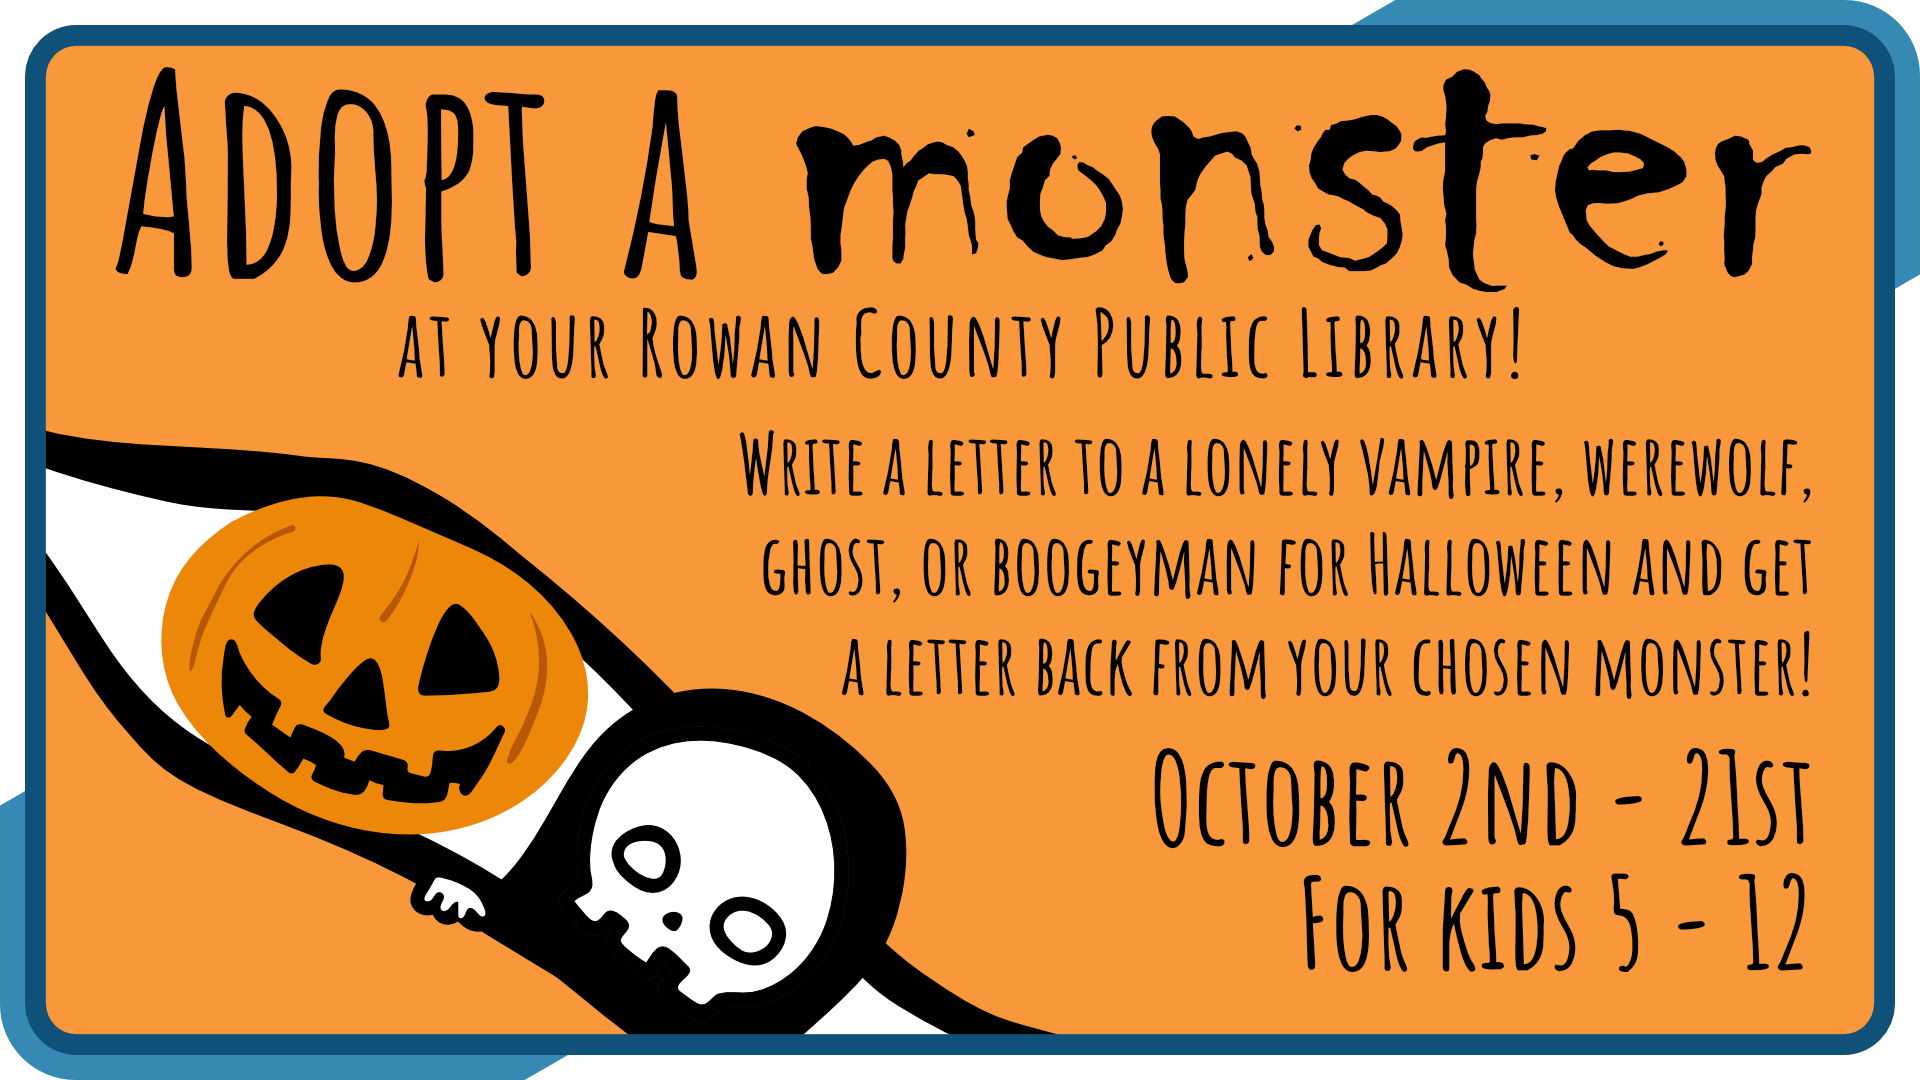 Adopt a Monster, October 2nd through 21st, intended for ages 5-12